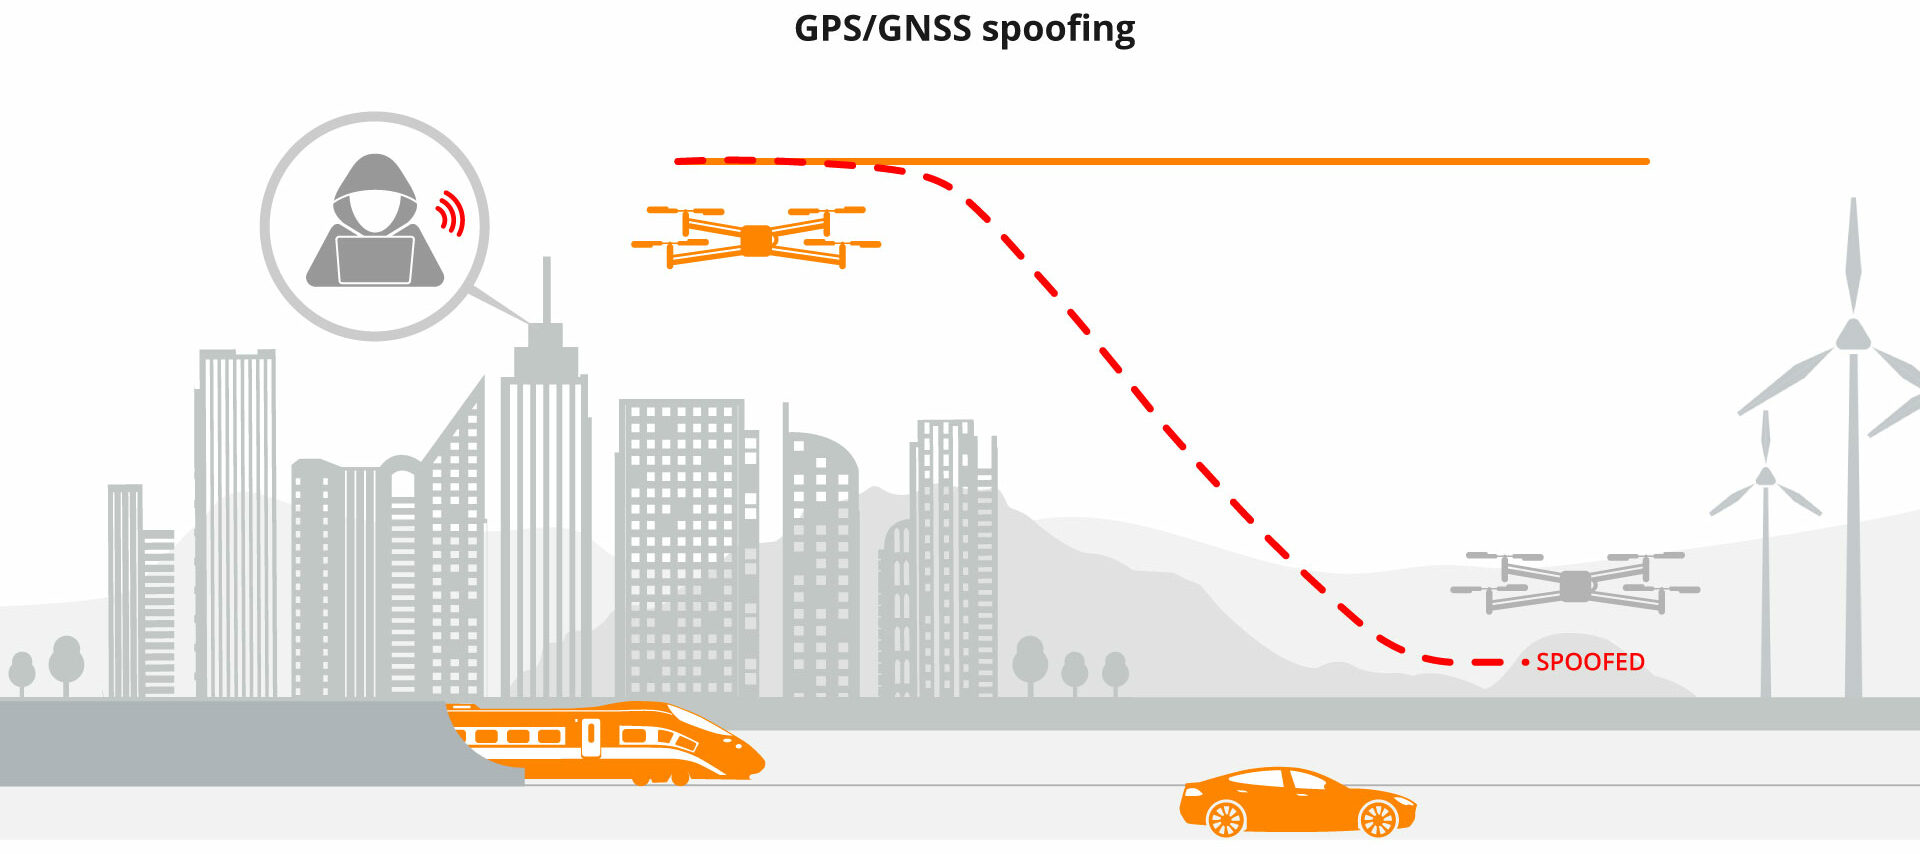 Secure GPS receivers are crucial for GNSS/INS systems